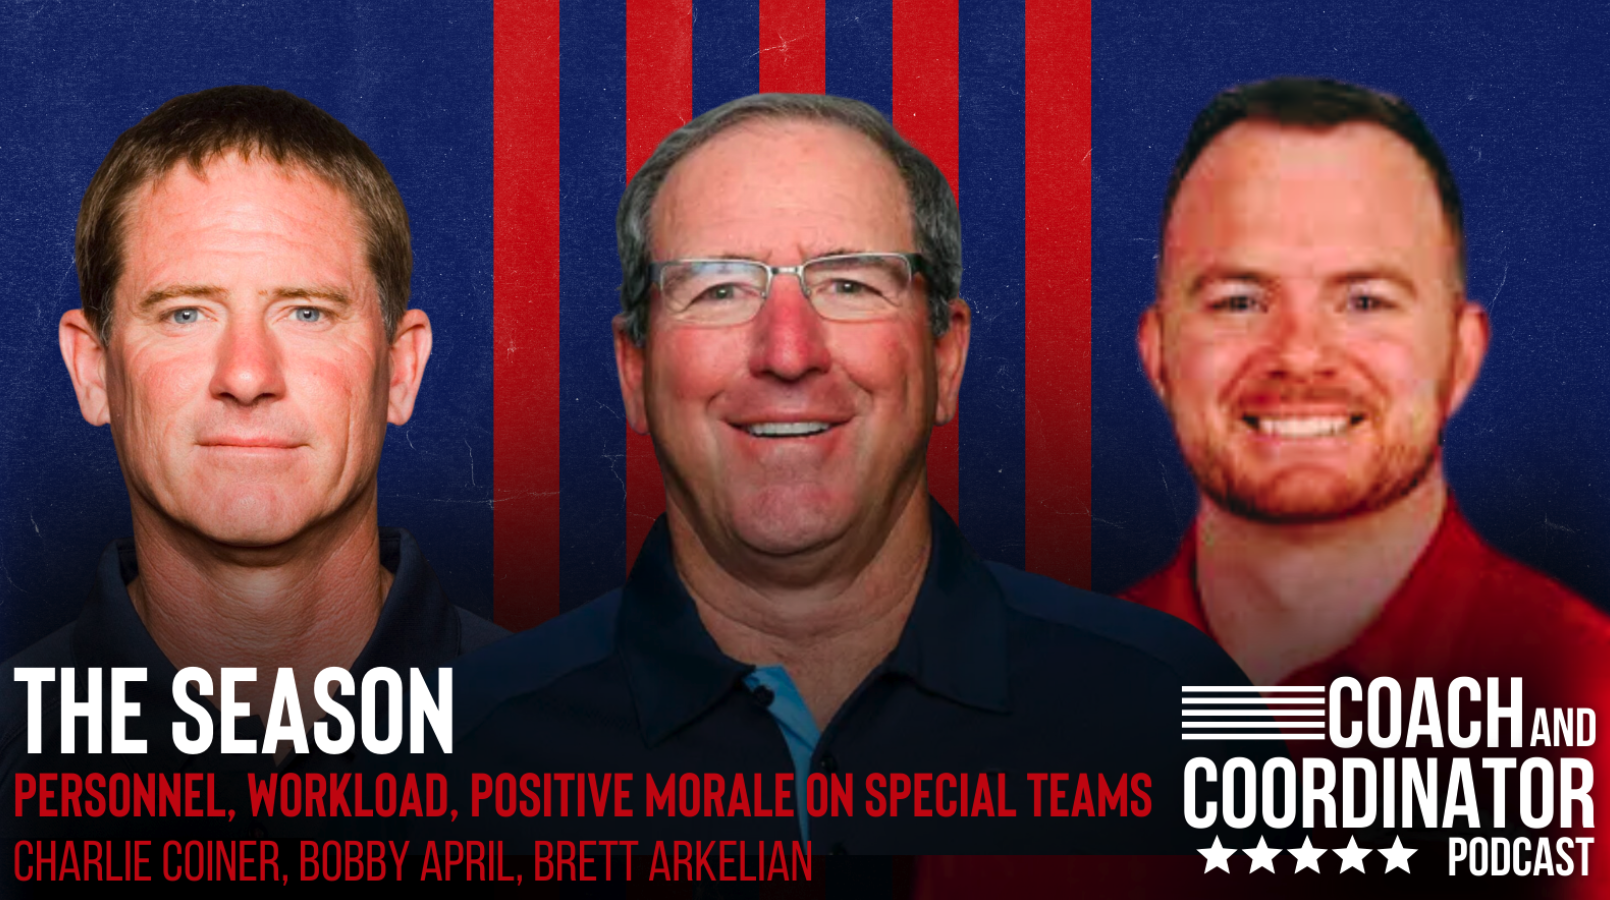 Charlie Coiner Featured on Coach And Coordinator Podcast